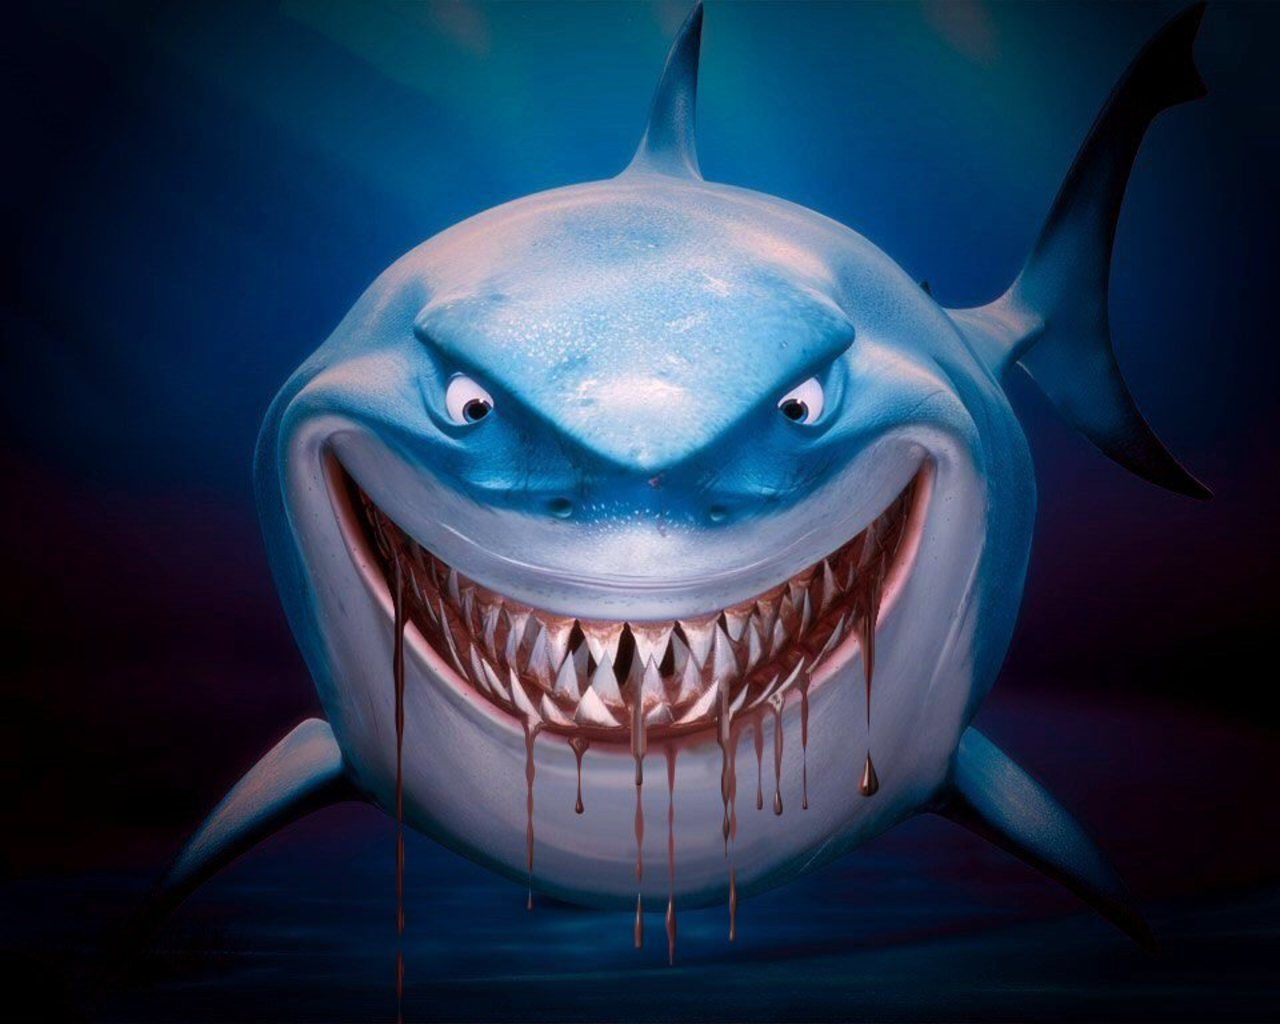 This image of a bloodthirsty shark is a representation of how